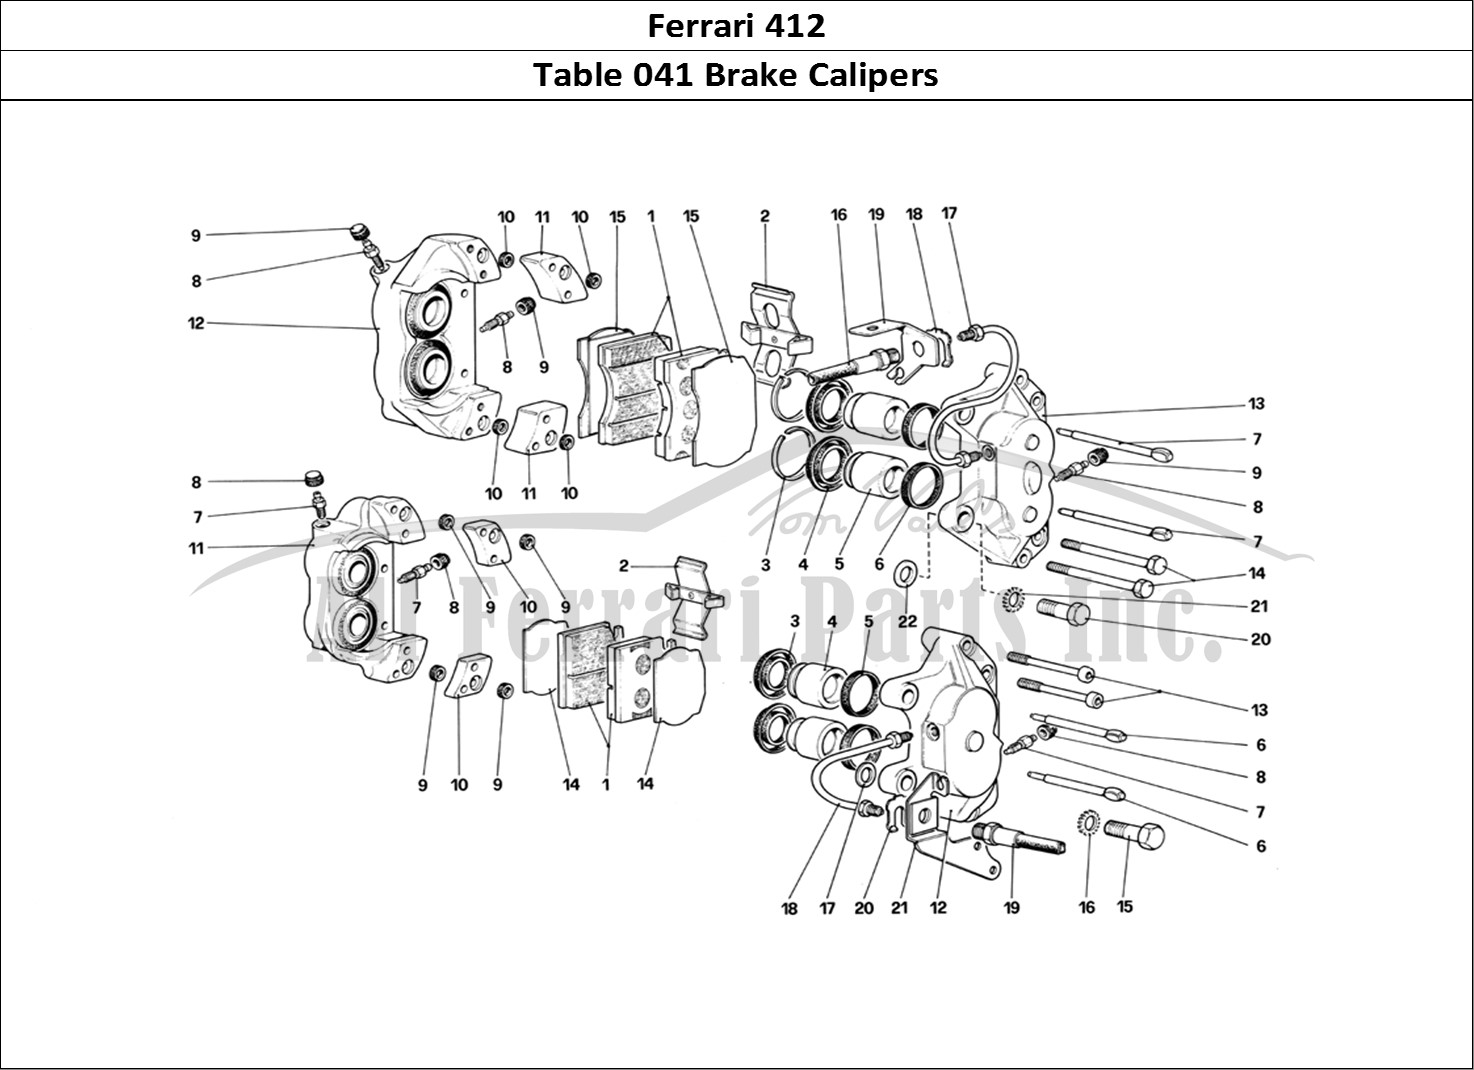 Ferrari Parts Ferrari 412 (Mechanical) Page 041 Calipers for Front and Re